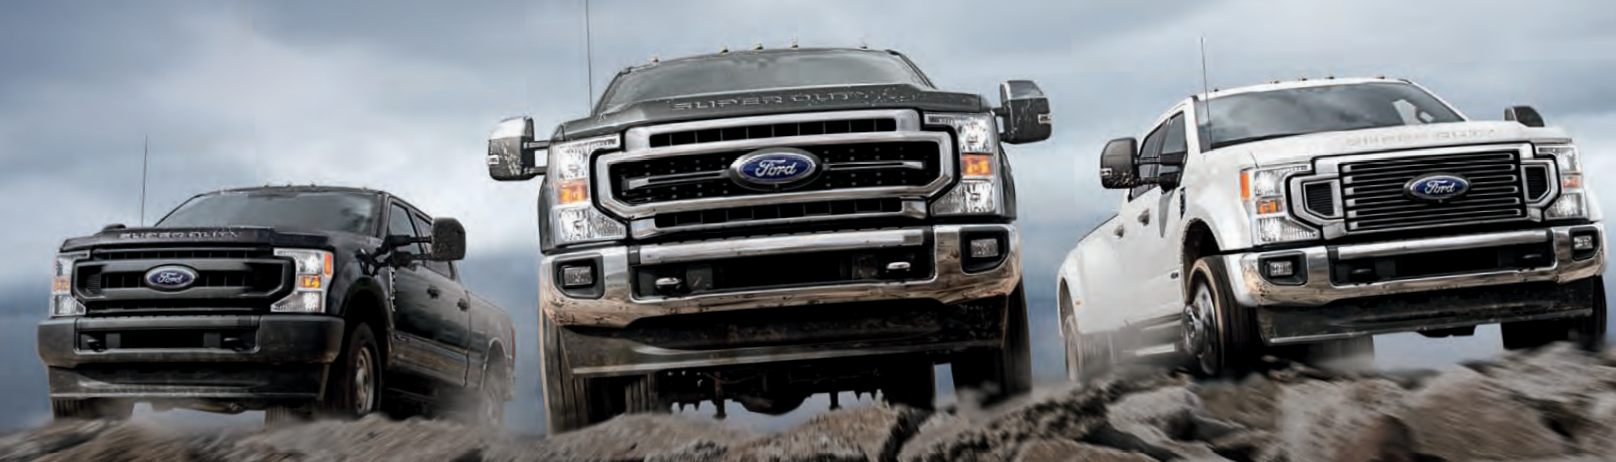 Three new 2021 Ford Super Duty F-250 trucks on the top of a cliff with black, grey and white exteriors from right to left. 